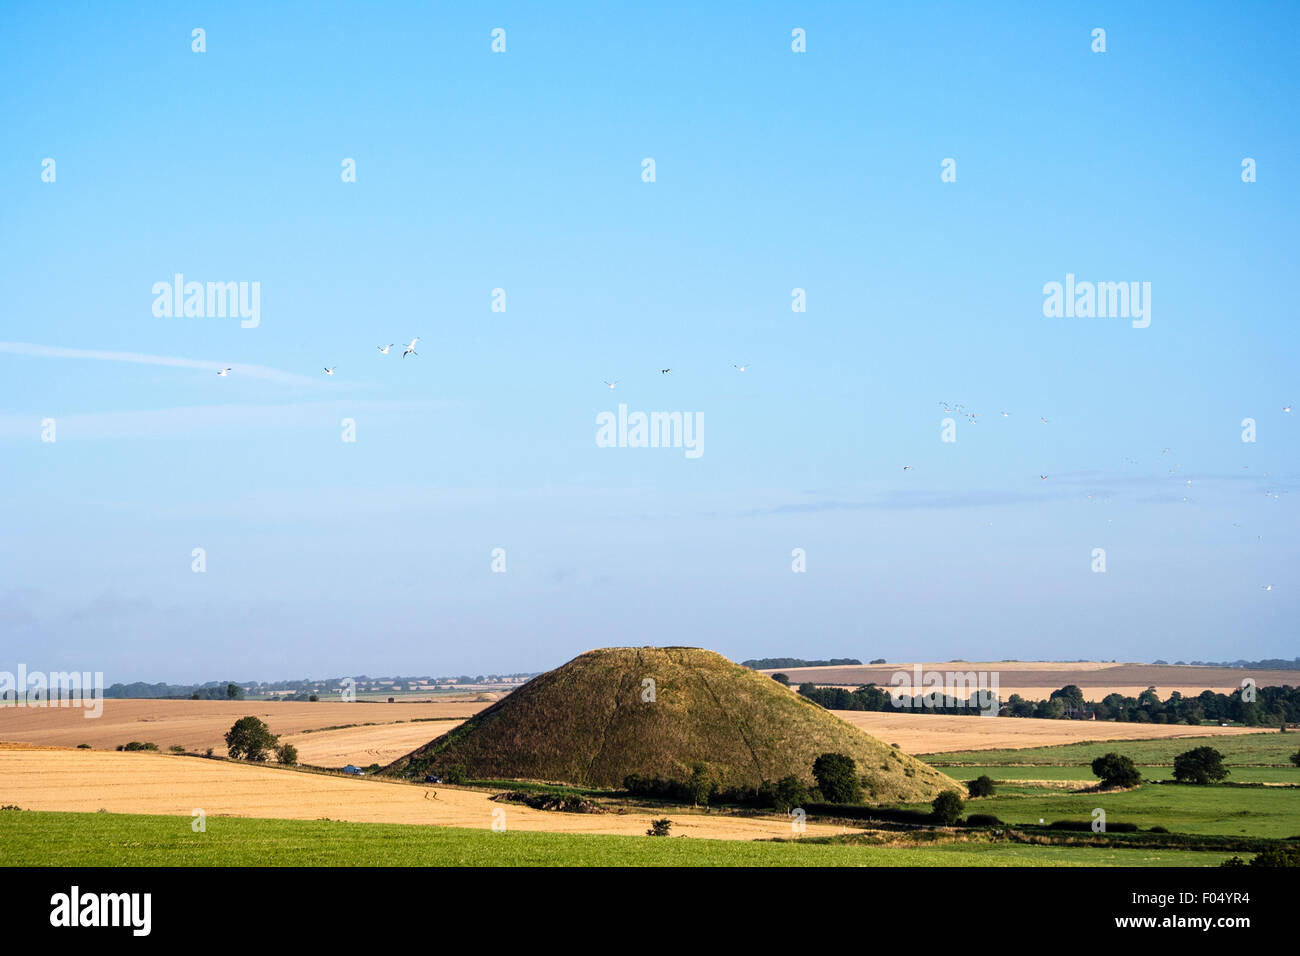 Distant shot of Silbury Hill, man-made Neolithic mound in England. A 40 meter high man-made grass mound standing tall in the relatively flat landscape. Stock Photo